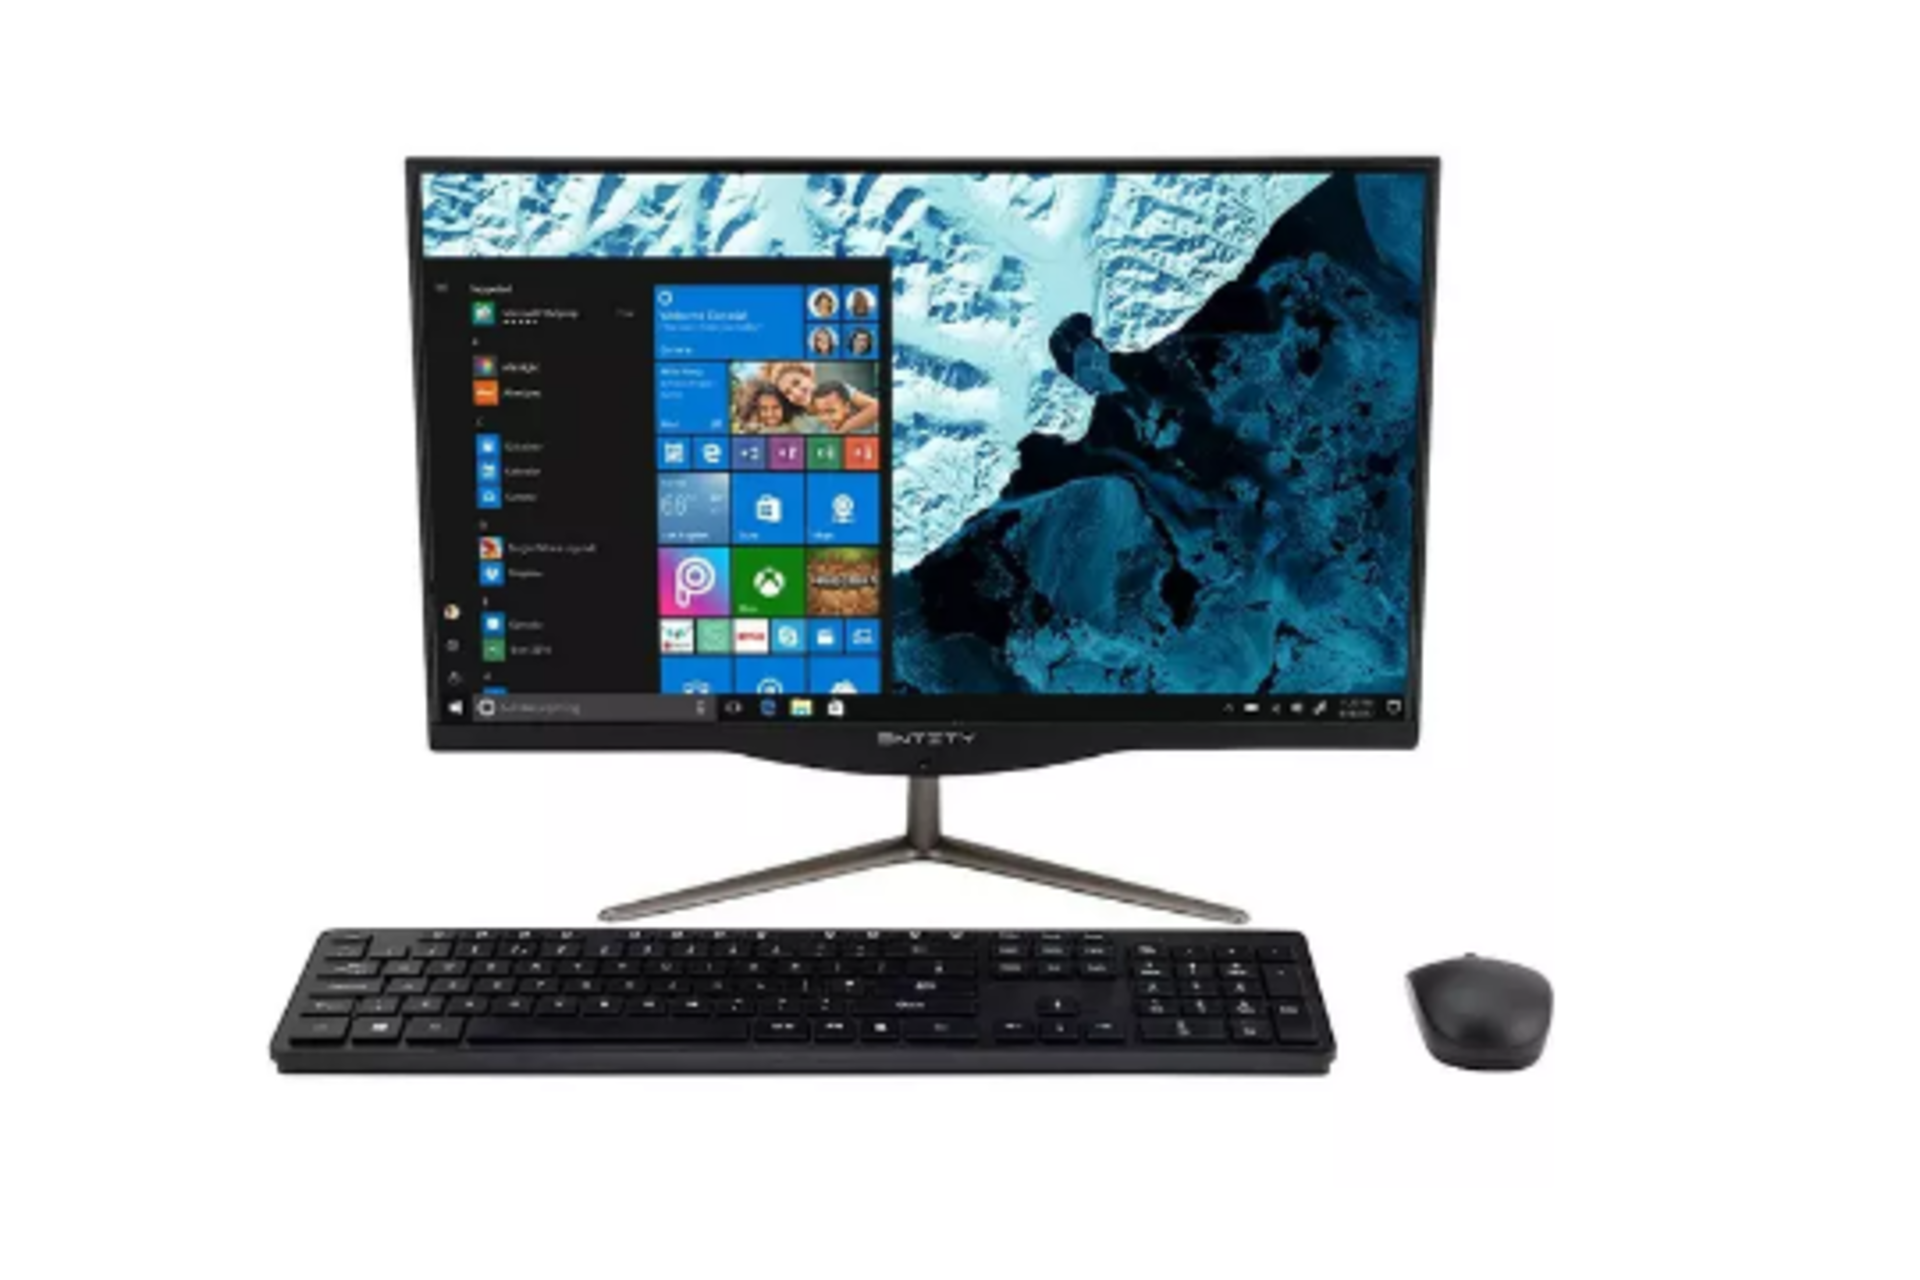 Brand new ENTITY Suite 21.5" All-In-One PC with Keyboard & Mouse, The All-In-One to meet all your